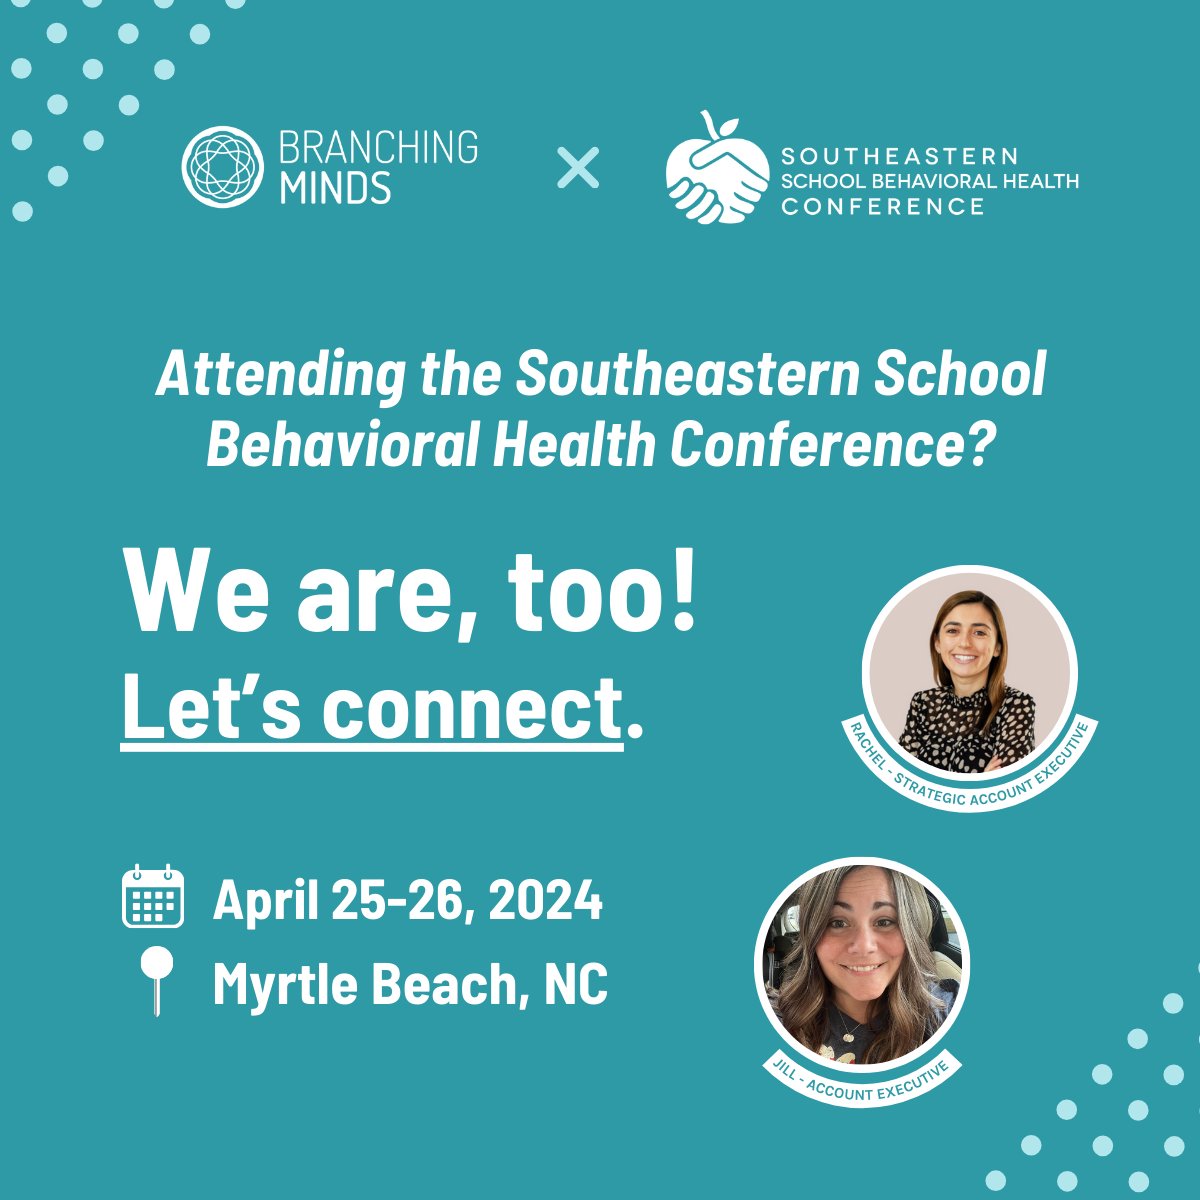 Let's meet! 👋Stop by our booth at the Southeastern School Behavioral Health Conference to explore how #BranchingMinds can turn your school's #MTSS goals into reality! 

👇RSVP to our exclusive #edleader dinner:
 hubs.la/Q02tZyyR0 #BehavioralHealth #K12 @BeSSBHC